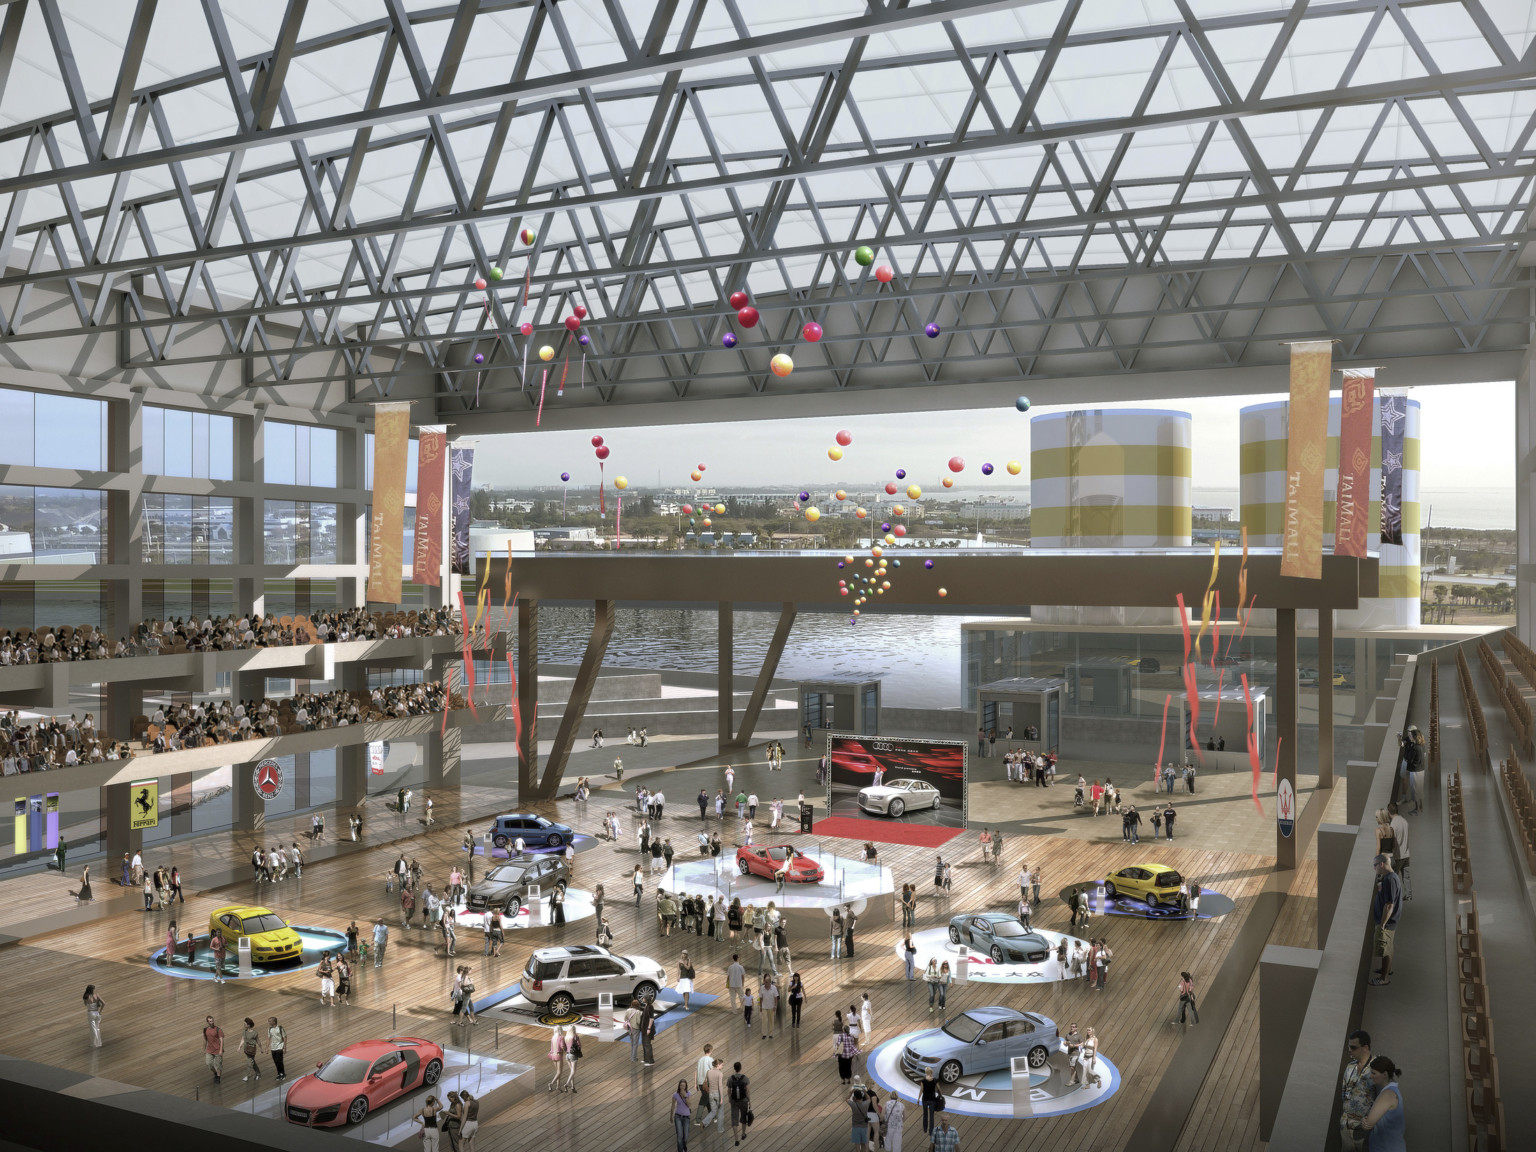 design concept of car show in building with open side facing Huangpu River. multi-level seating areas surround ground floor